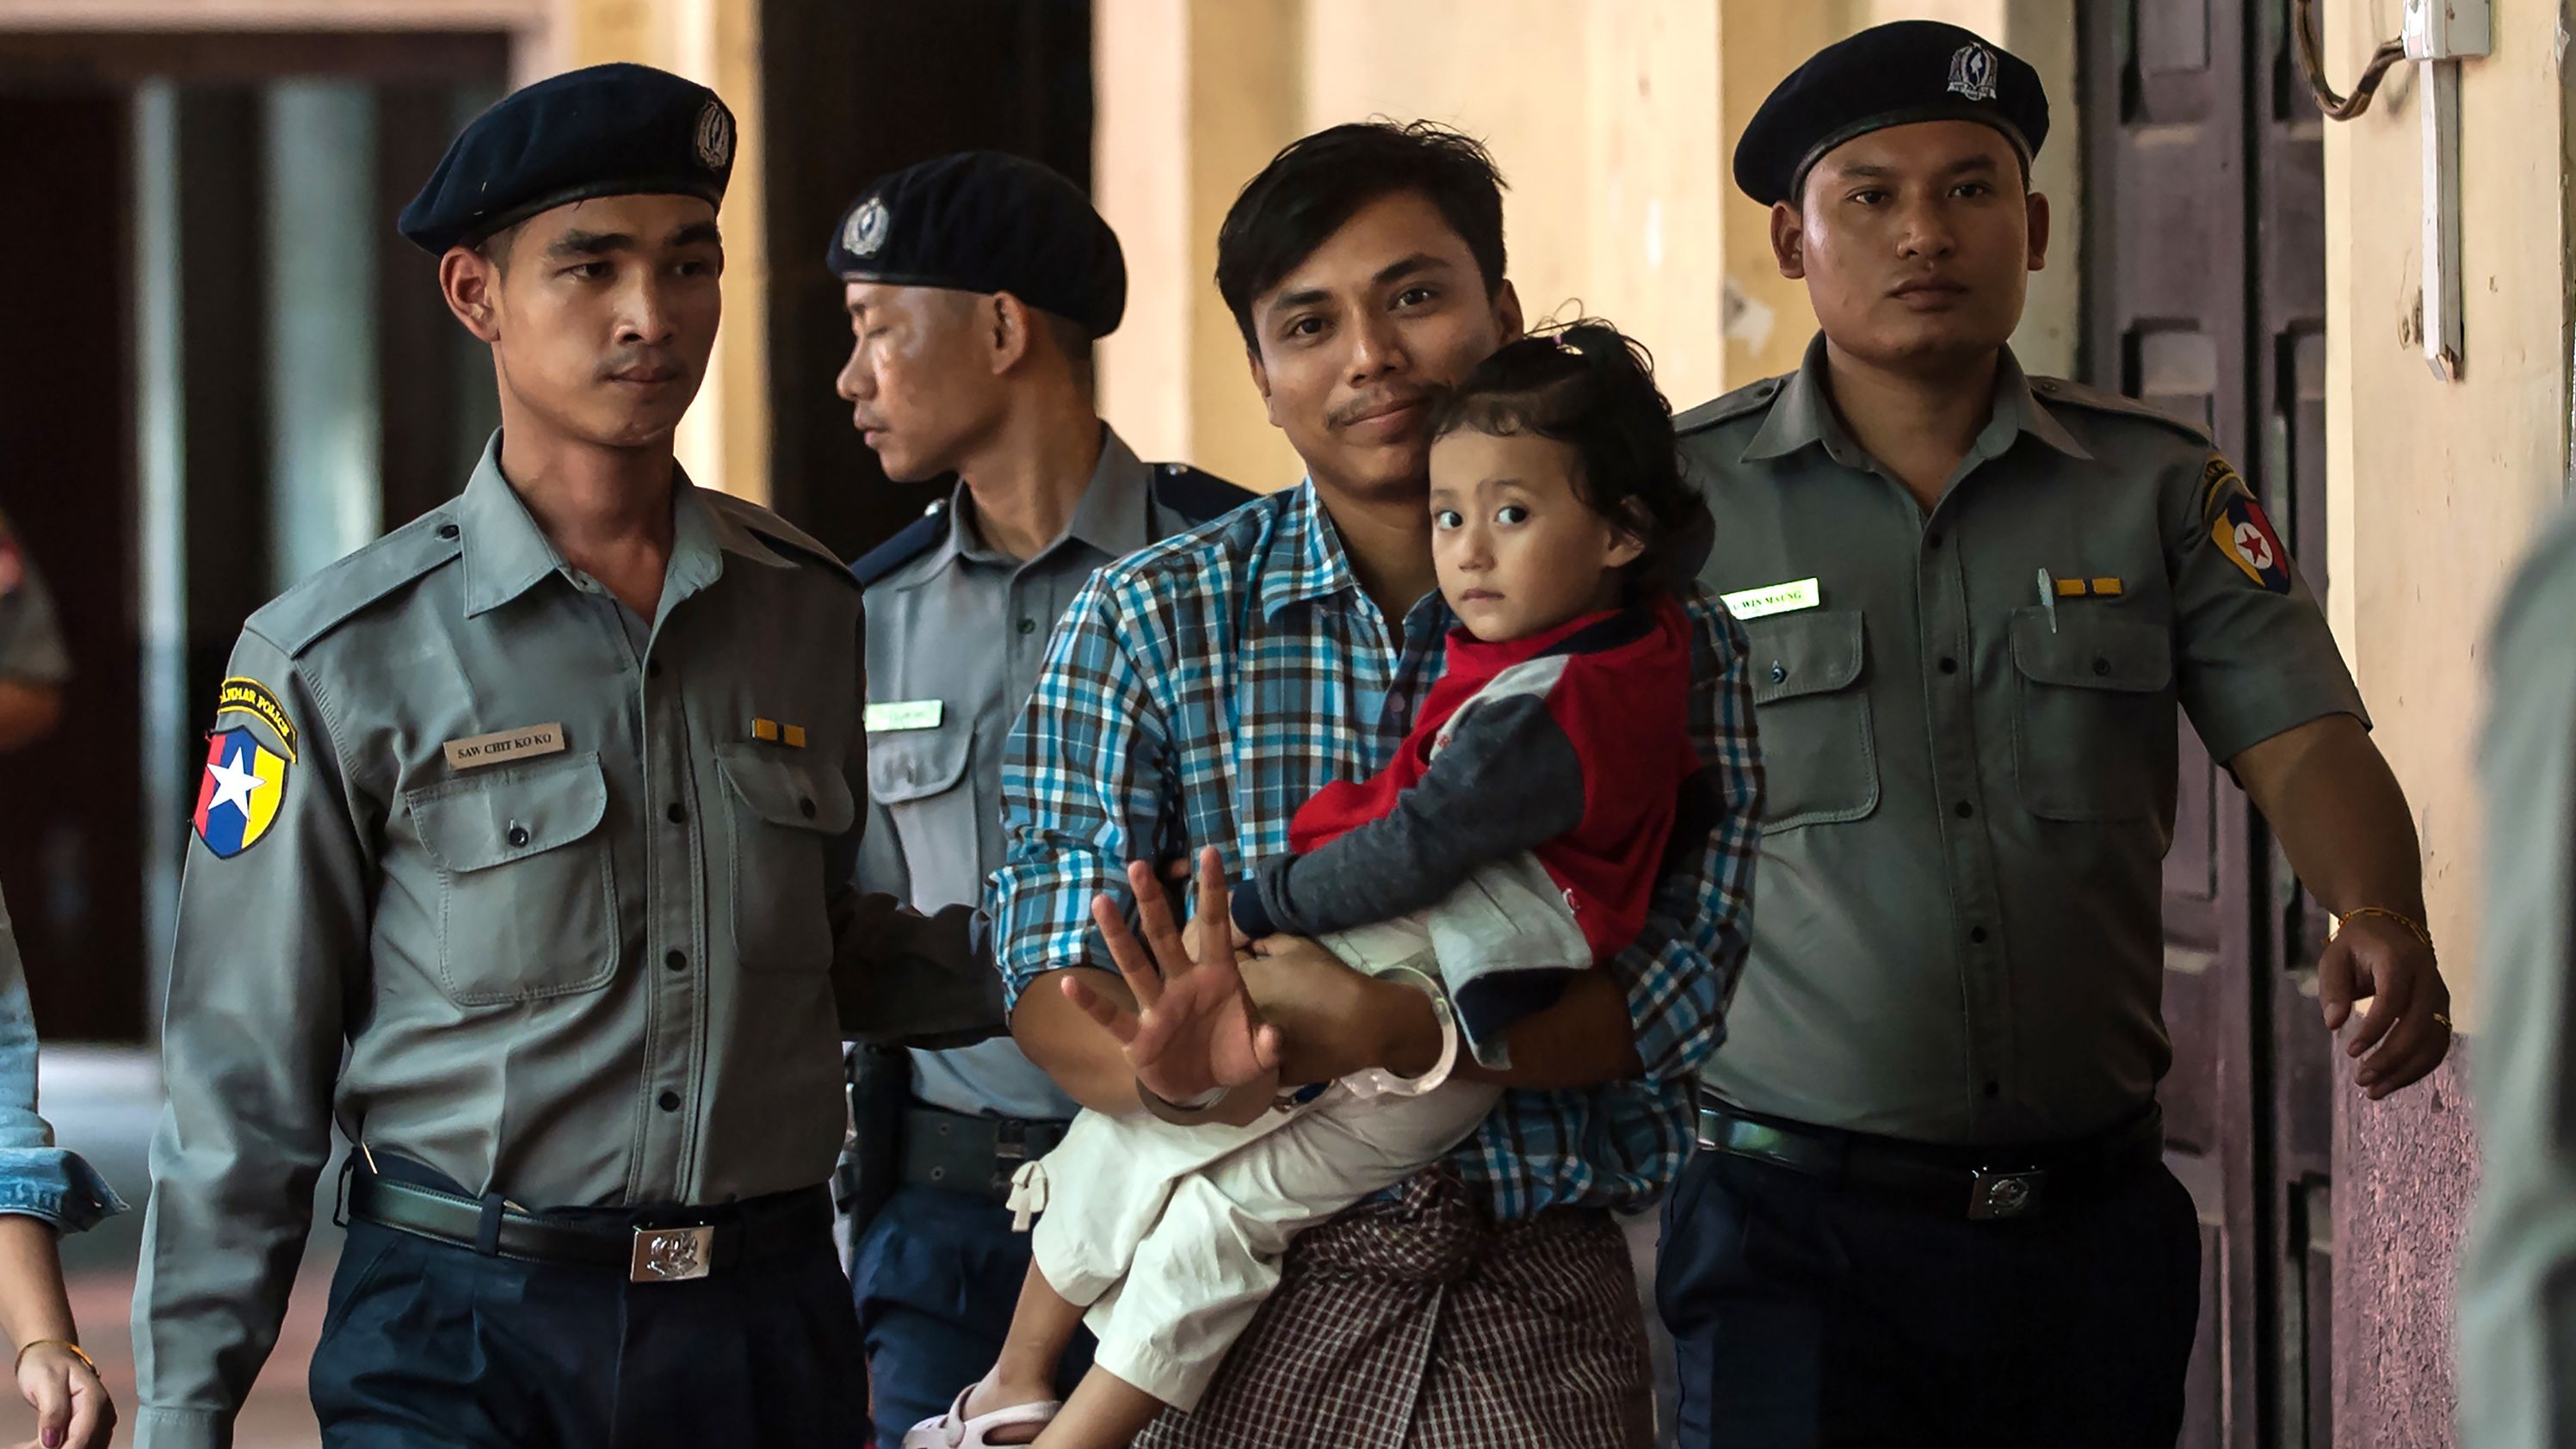 Detained Myanmar journalist Kyaw Soe Oo carrying his daughter is escorted by police for his ongoing trial at a court in Yangon on June 12, 2018.